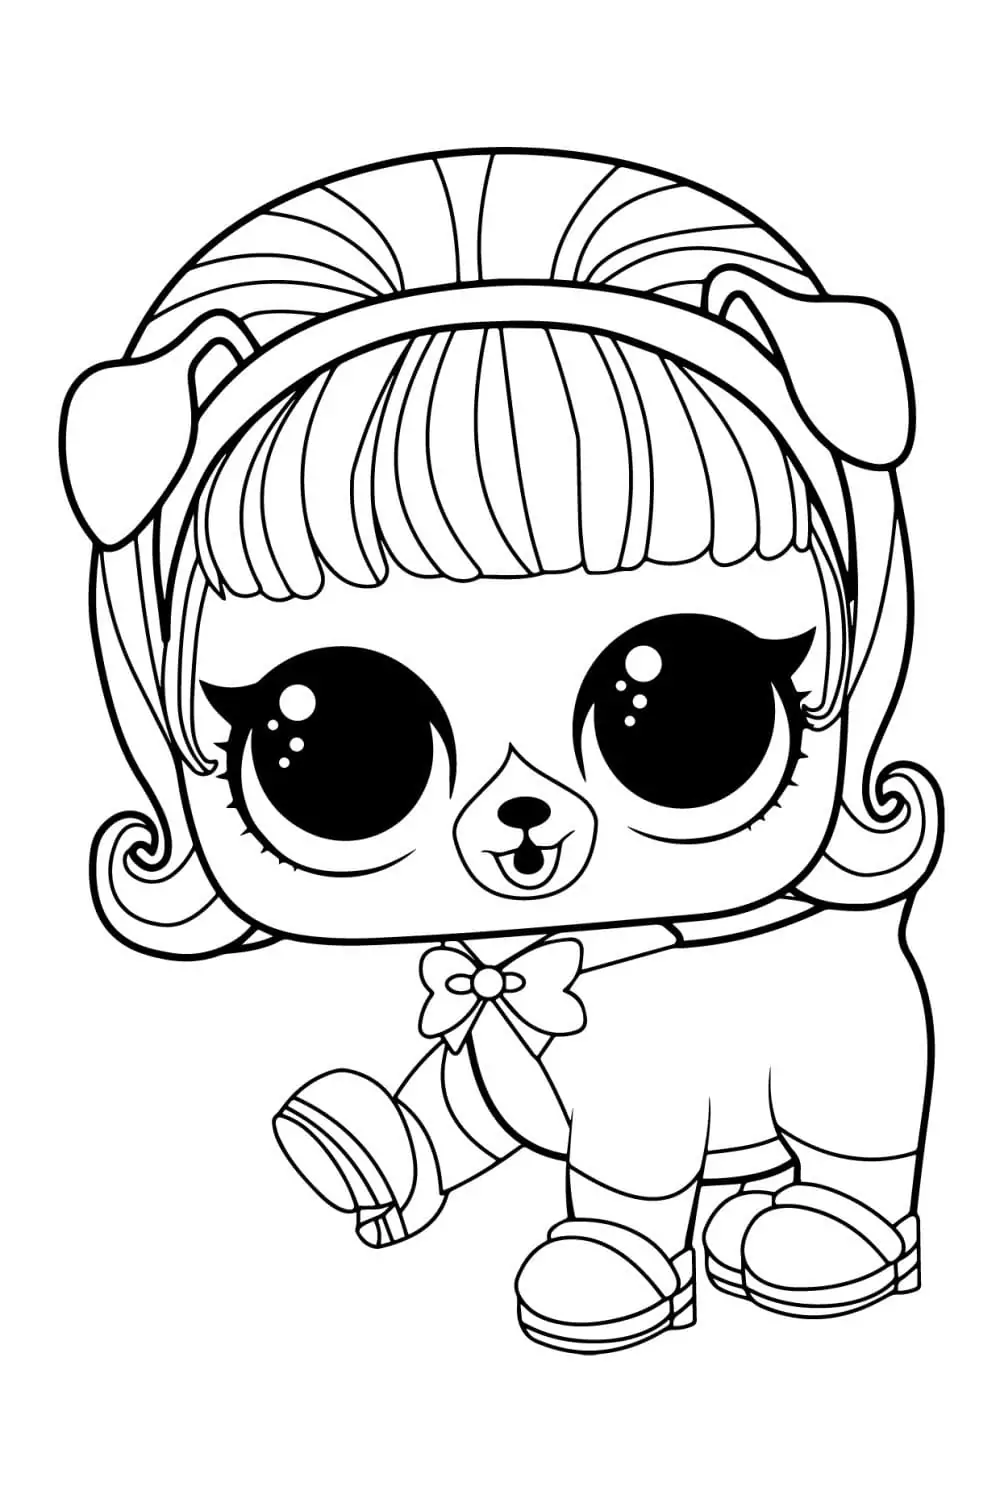 Crystal Bunny Lol Pets Coloring Page - Free Printable Coloring Pages ...